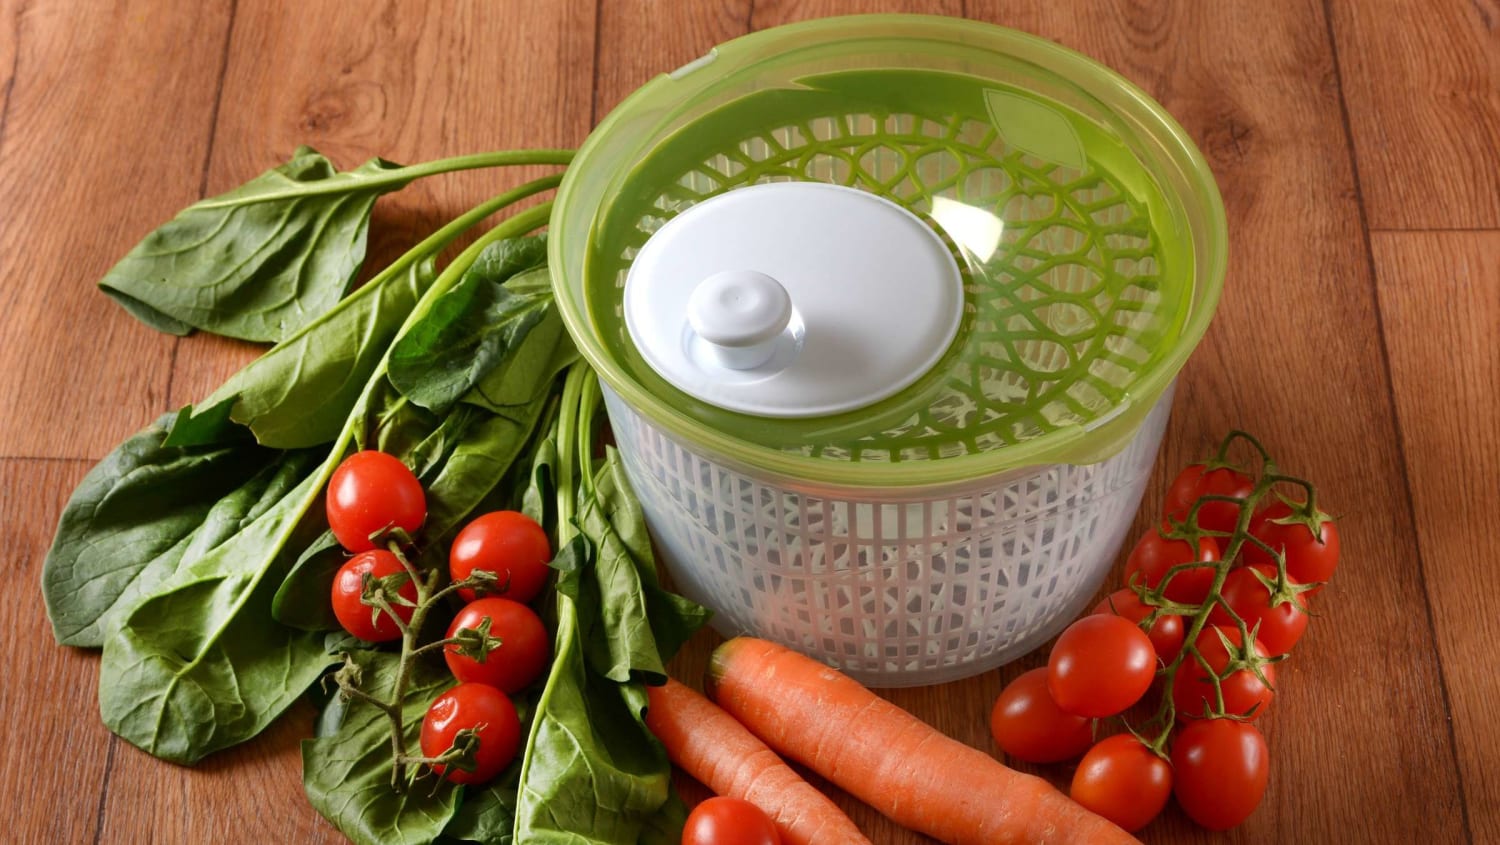 13 Non-Salad Uses for Your Salad Spinner